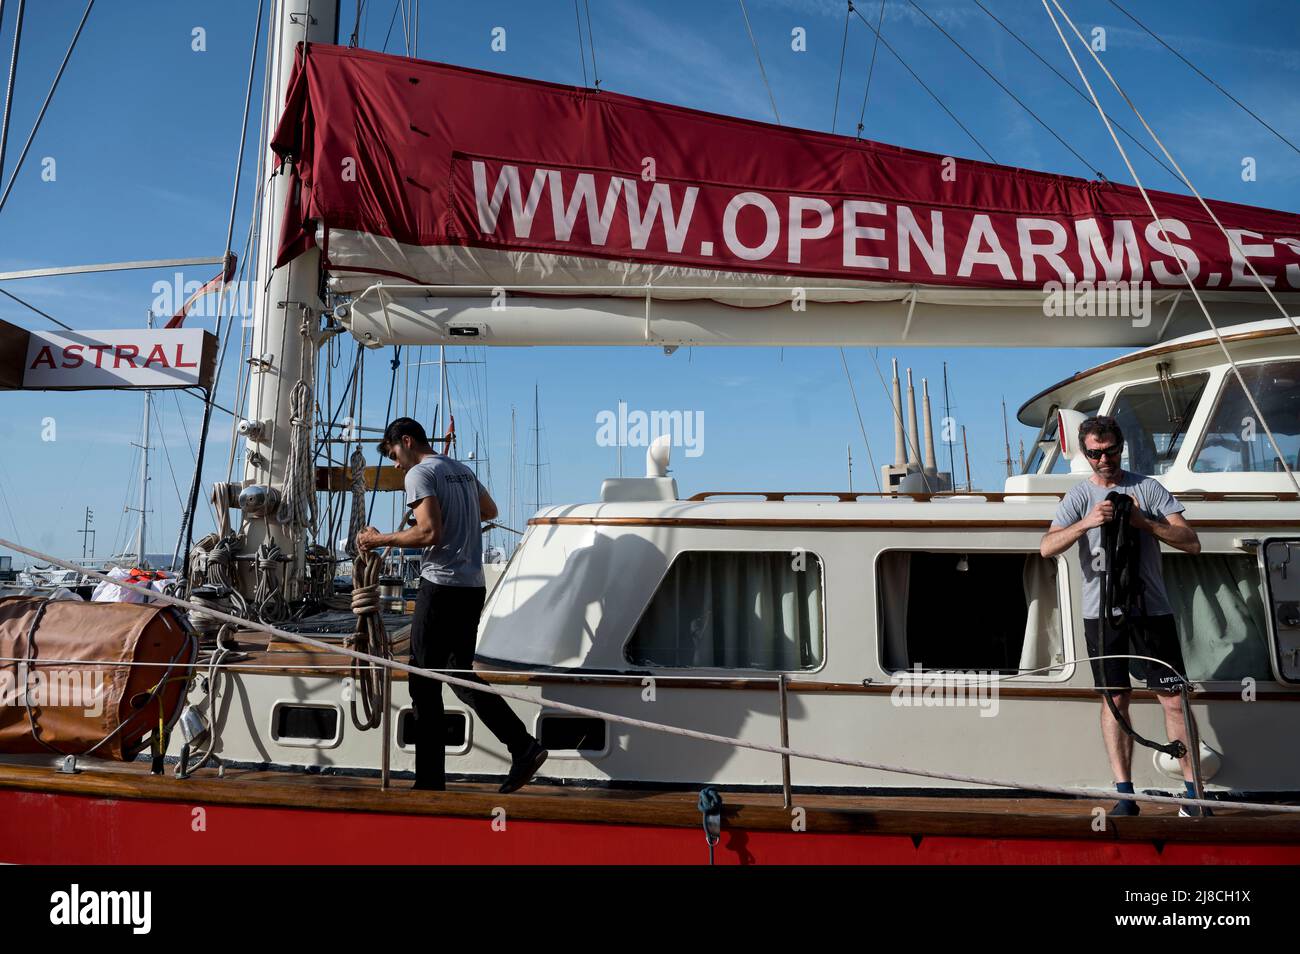 May 15, 2022, Badalona, Catanzaro, Spain: Members of the crew seen preparing to sail. The Spanish NGO Open Arms starts a new rescue mission in Central Mediterranean area, with their first sailboat Astral. (Credit Image: © Valeria Ferraro/ZUMA Press Wire) Stock Photo